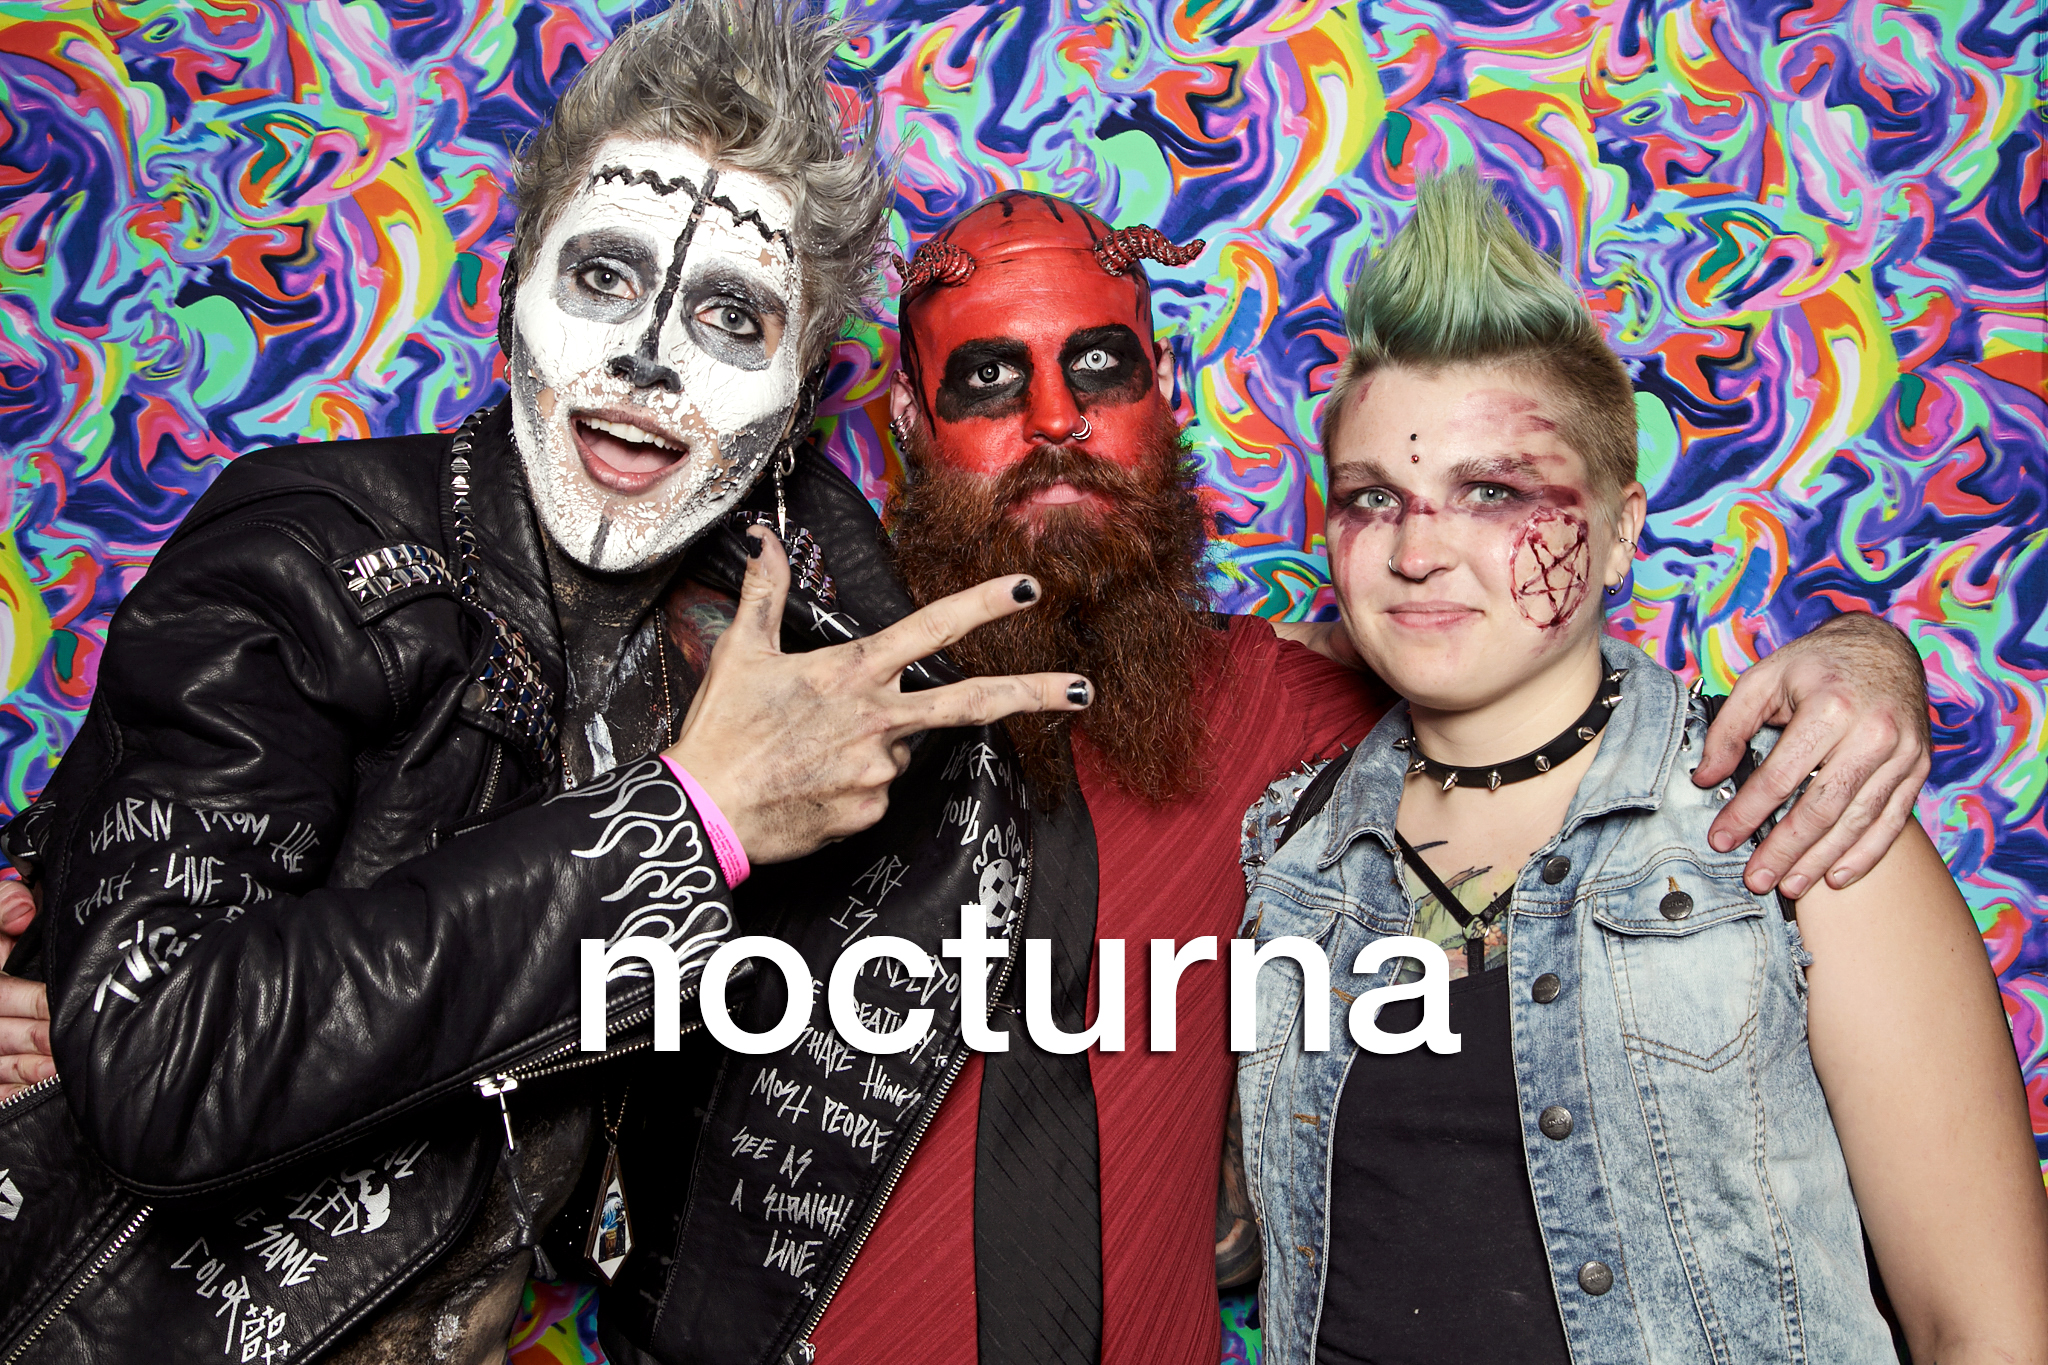 glitterguts portrait booth photos from halloween at nocturna, chicago 2021